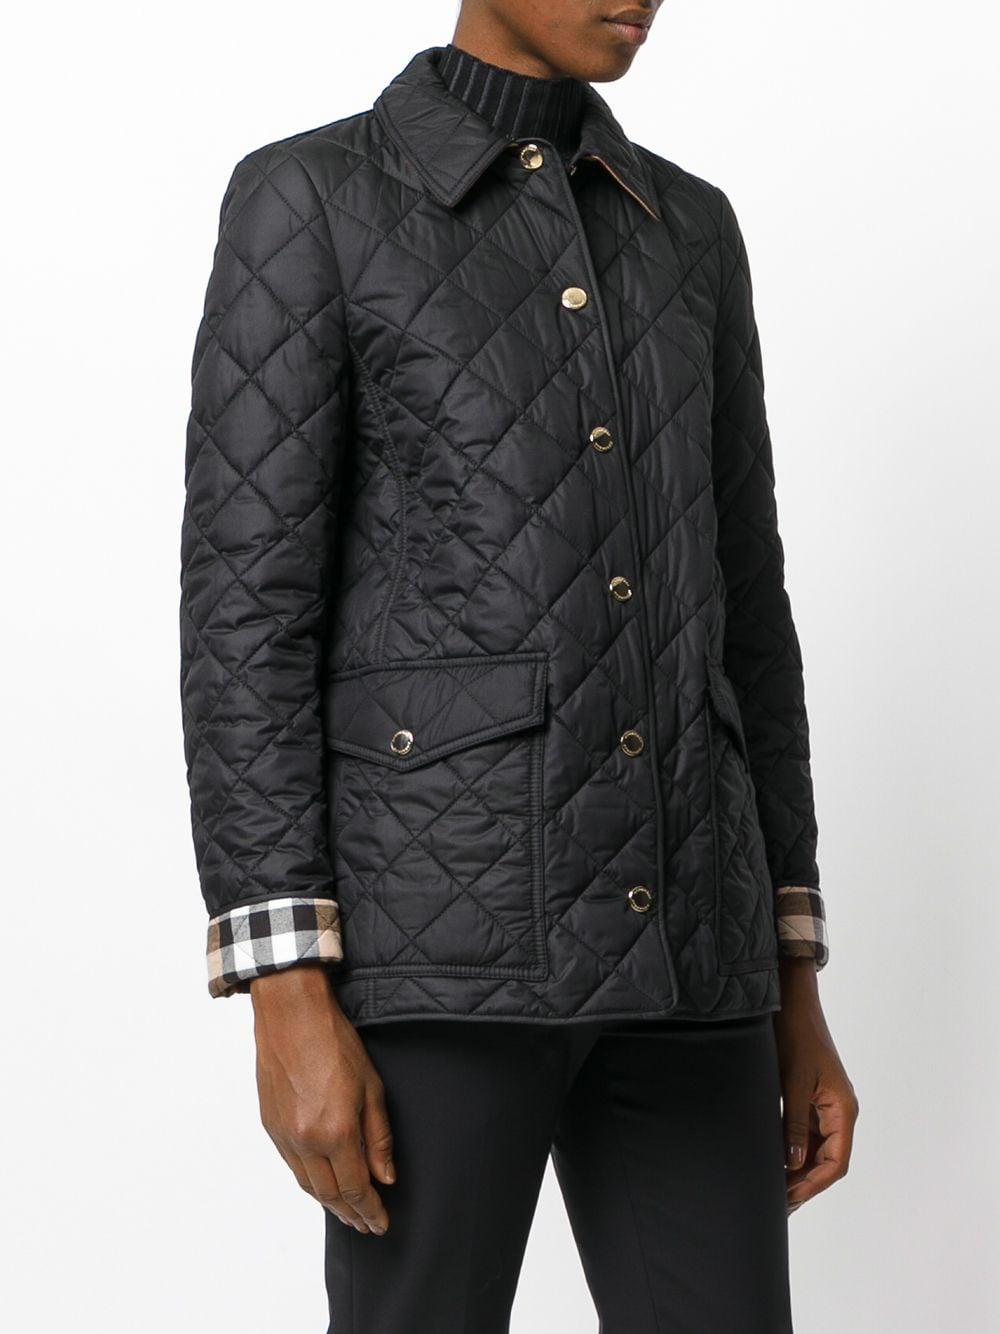 burberry check detail diamond quilted jacket